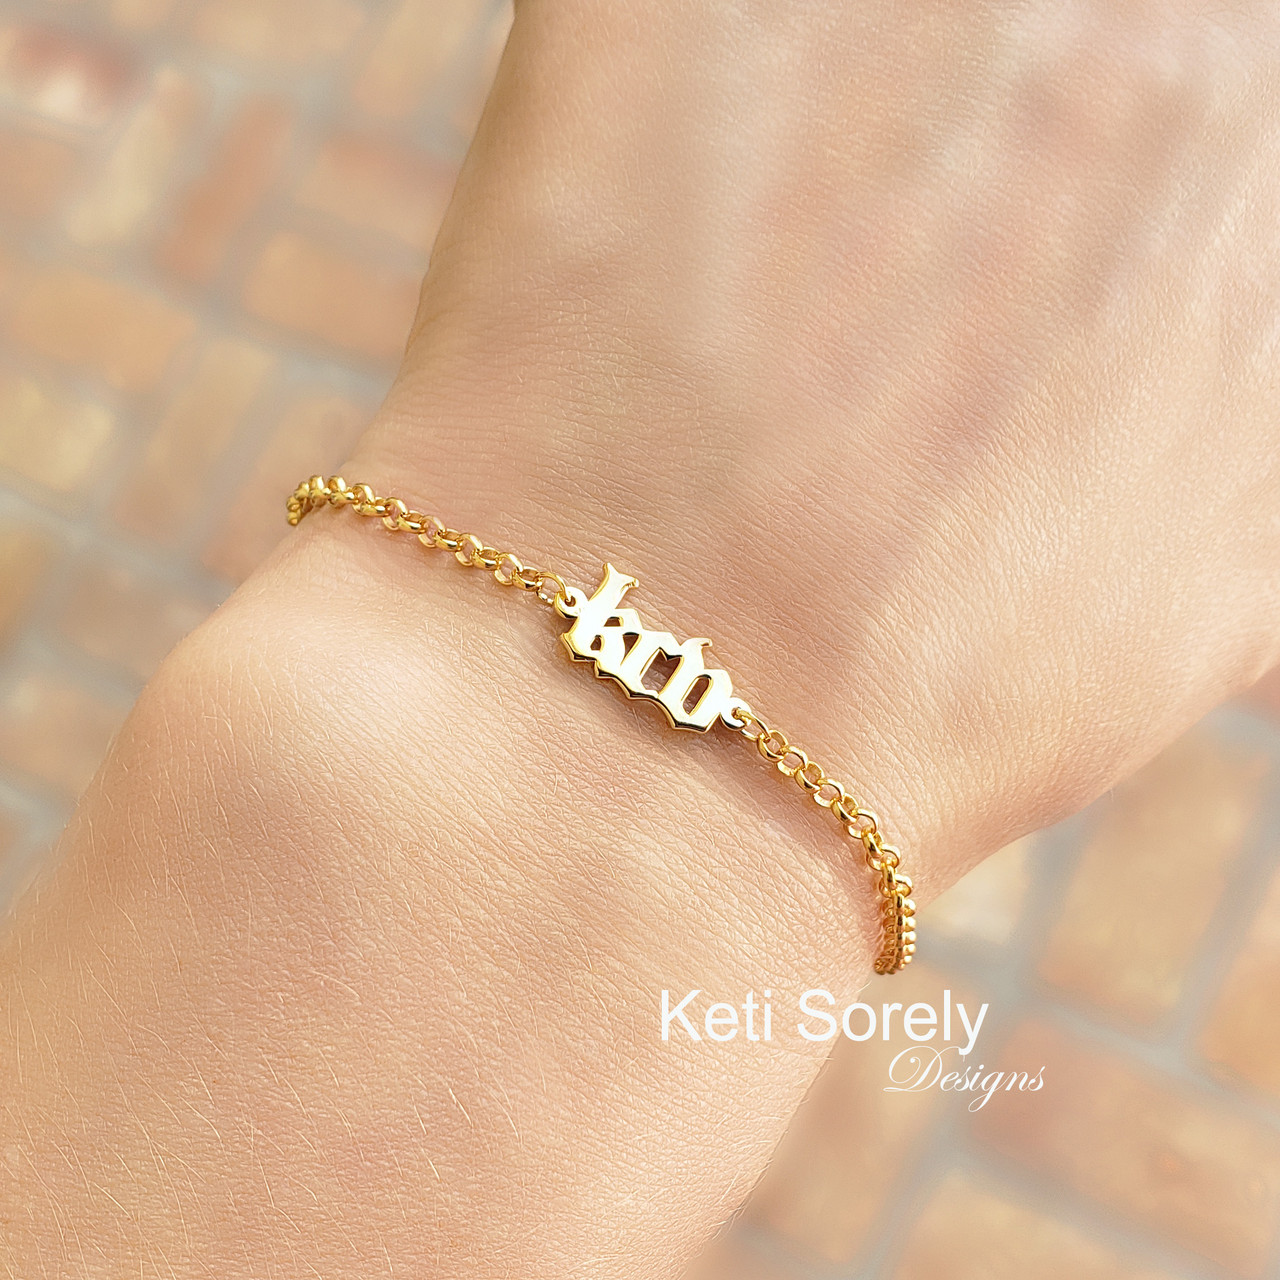 Mini initials bracelet handmade using Gothic letters in Sterling Silver or  solid karat gold.